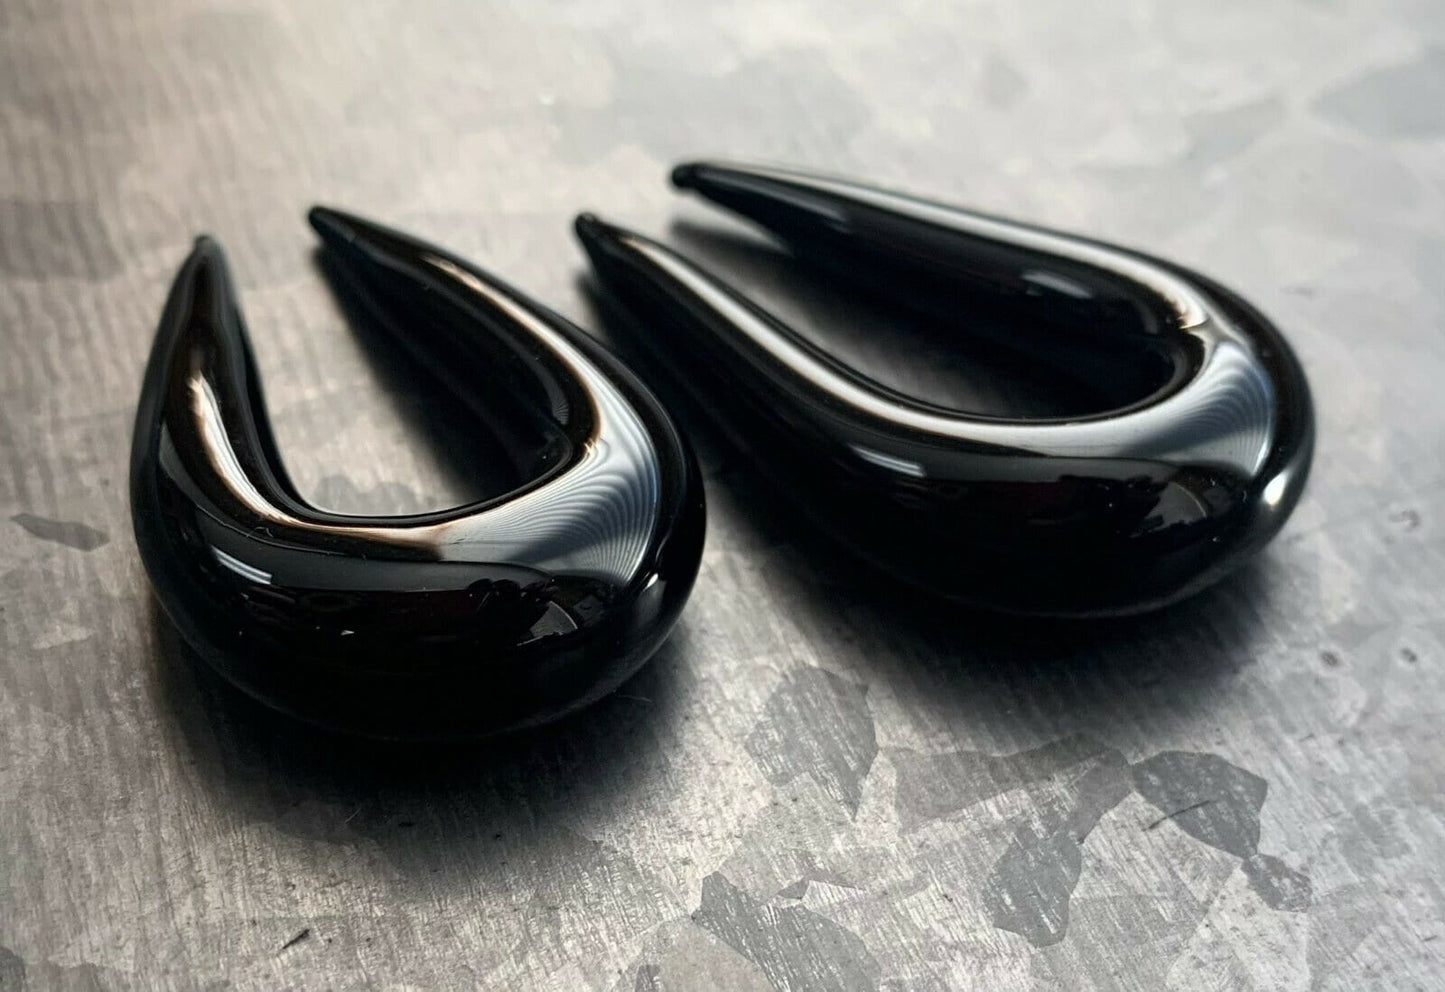 PAIR of Beautiful Black U-Shaped Glass Taper Plugs - Expanders Gauges - 8g (3mm) thru 00g (10mm) available!